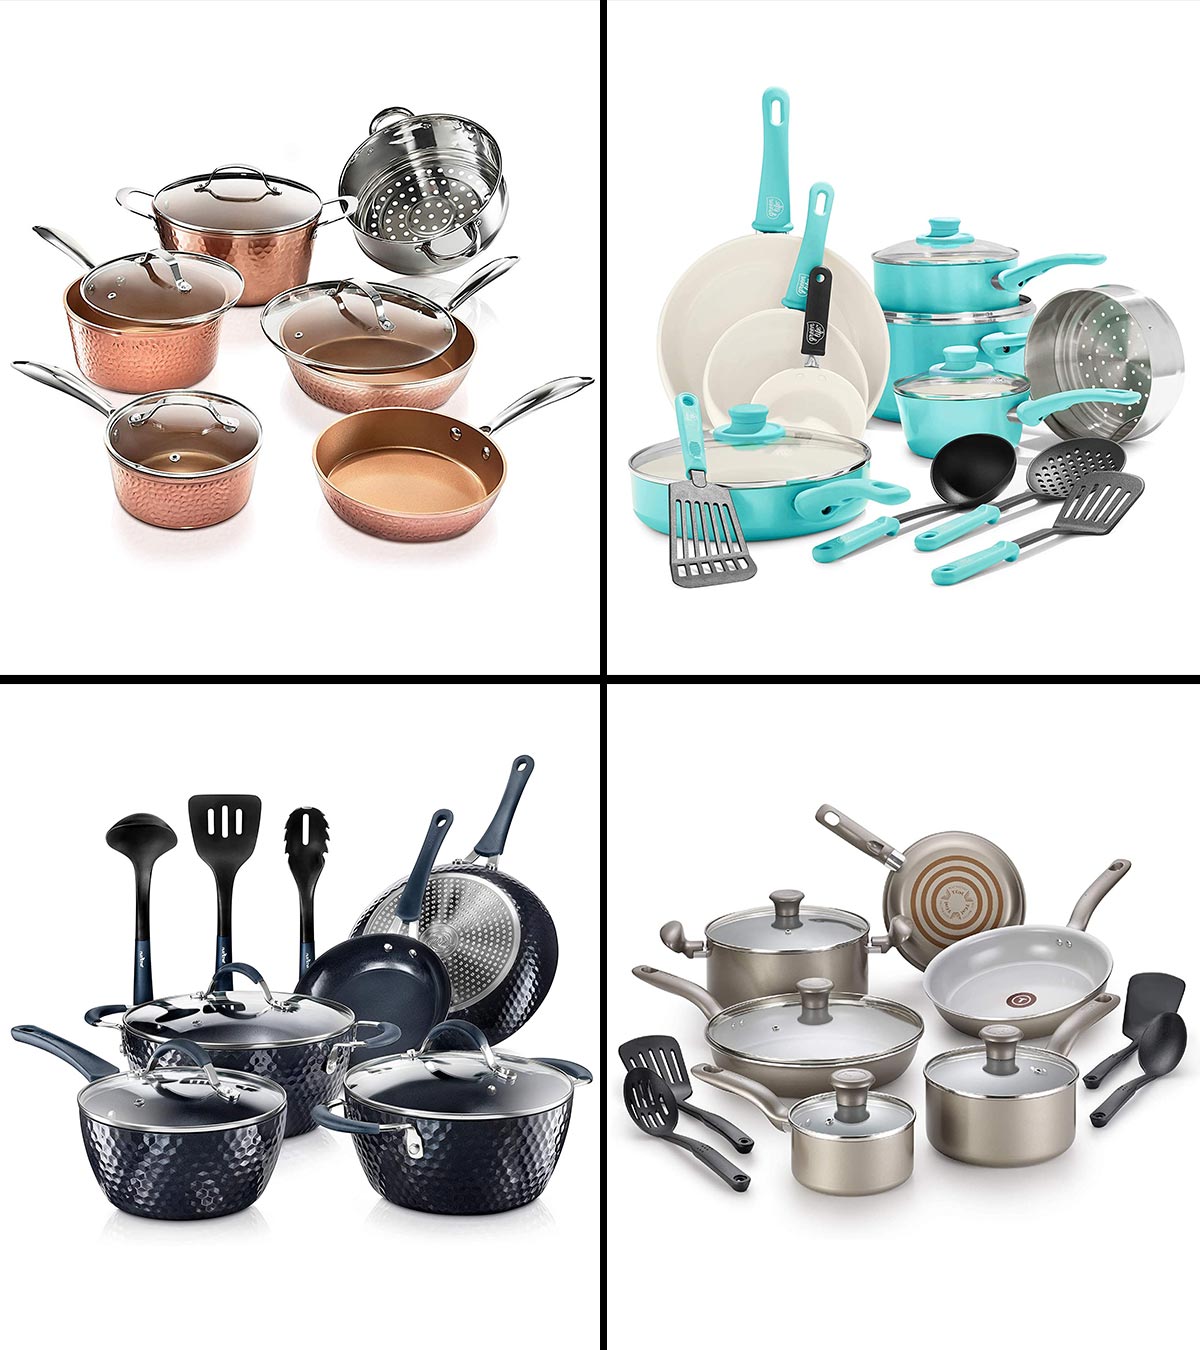 https://www.momjunction.com/wp-content/uploads/2021/06/11-Best-Non-toxic-Cookware-Sets-To-Buy-In-2021-Banner-MJ.jpg